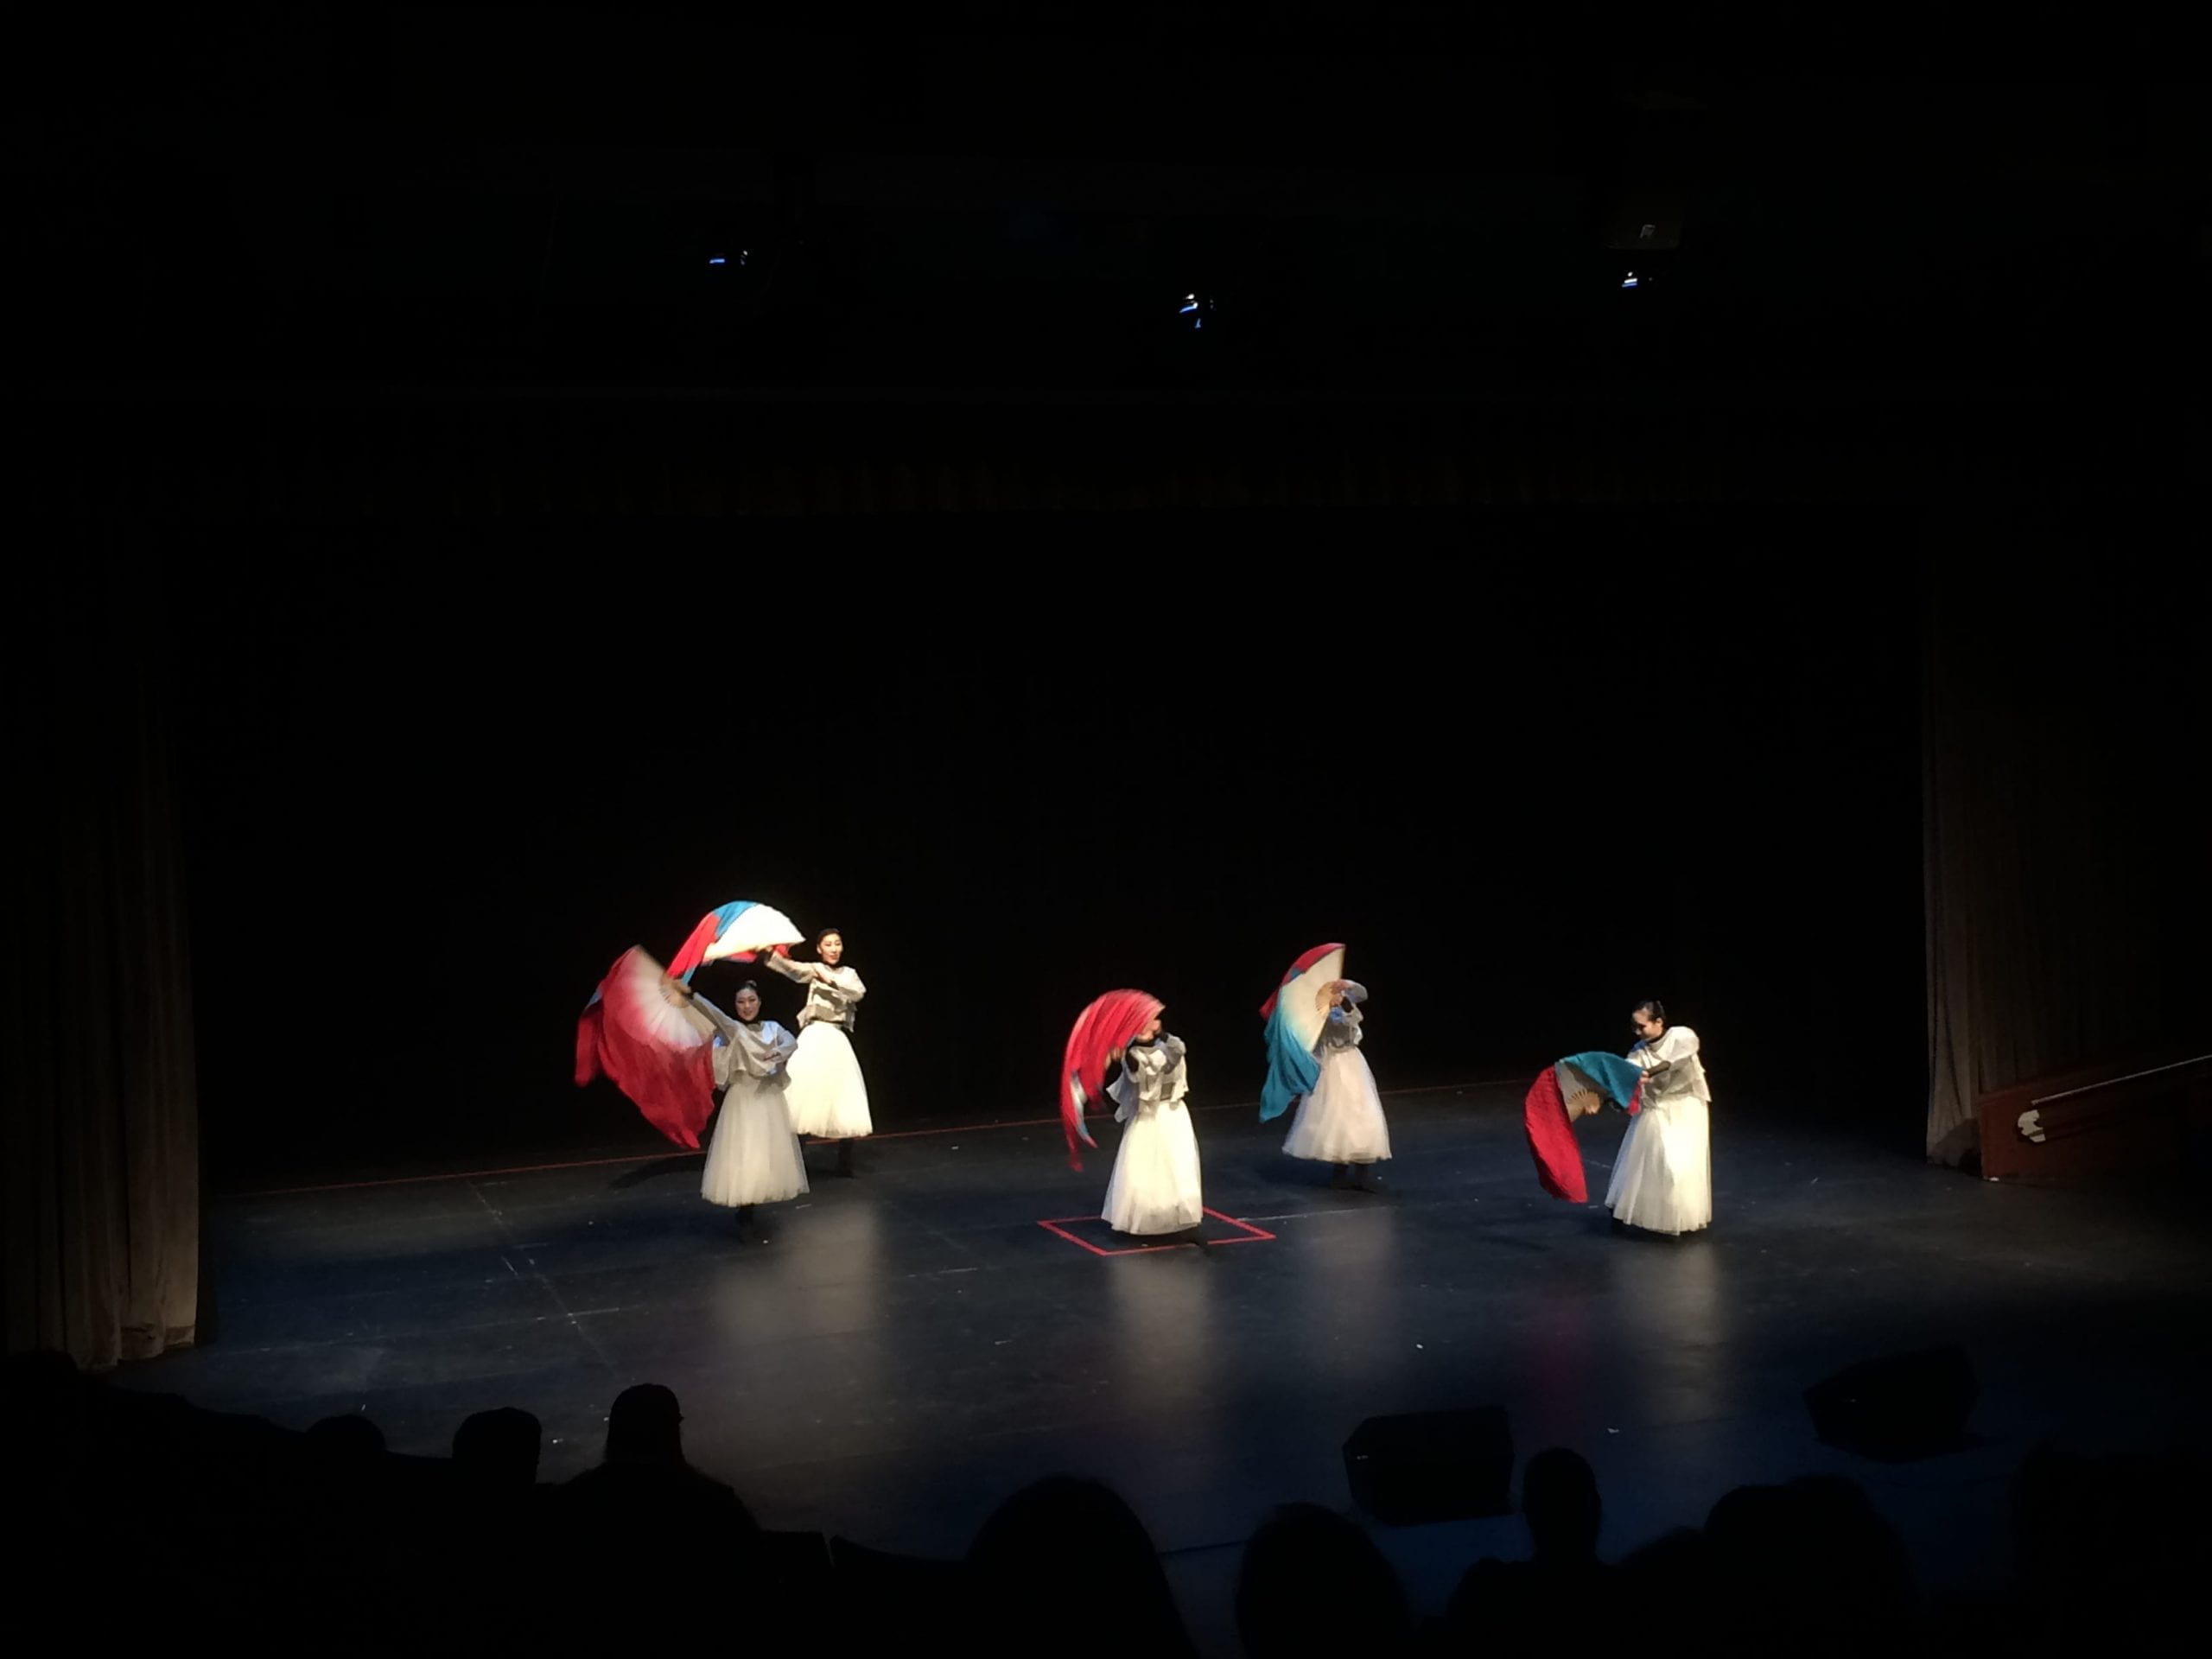 Nanuri Dance Company performers on stage performing dance to celebrate Hangeul Day